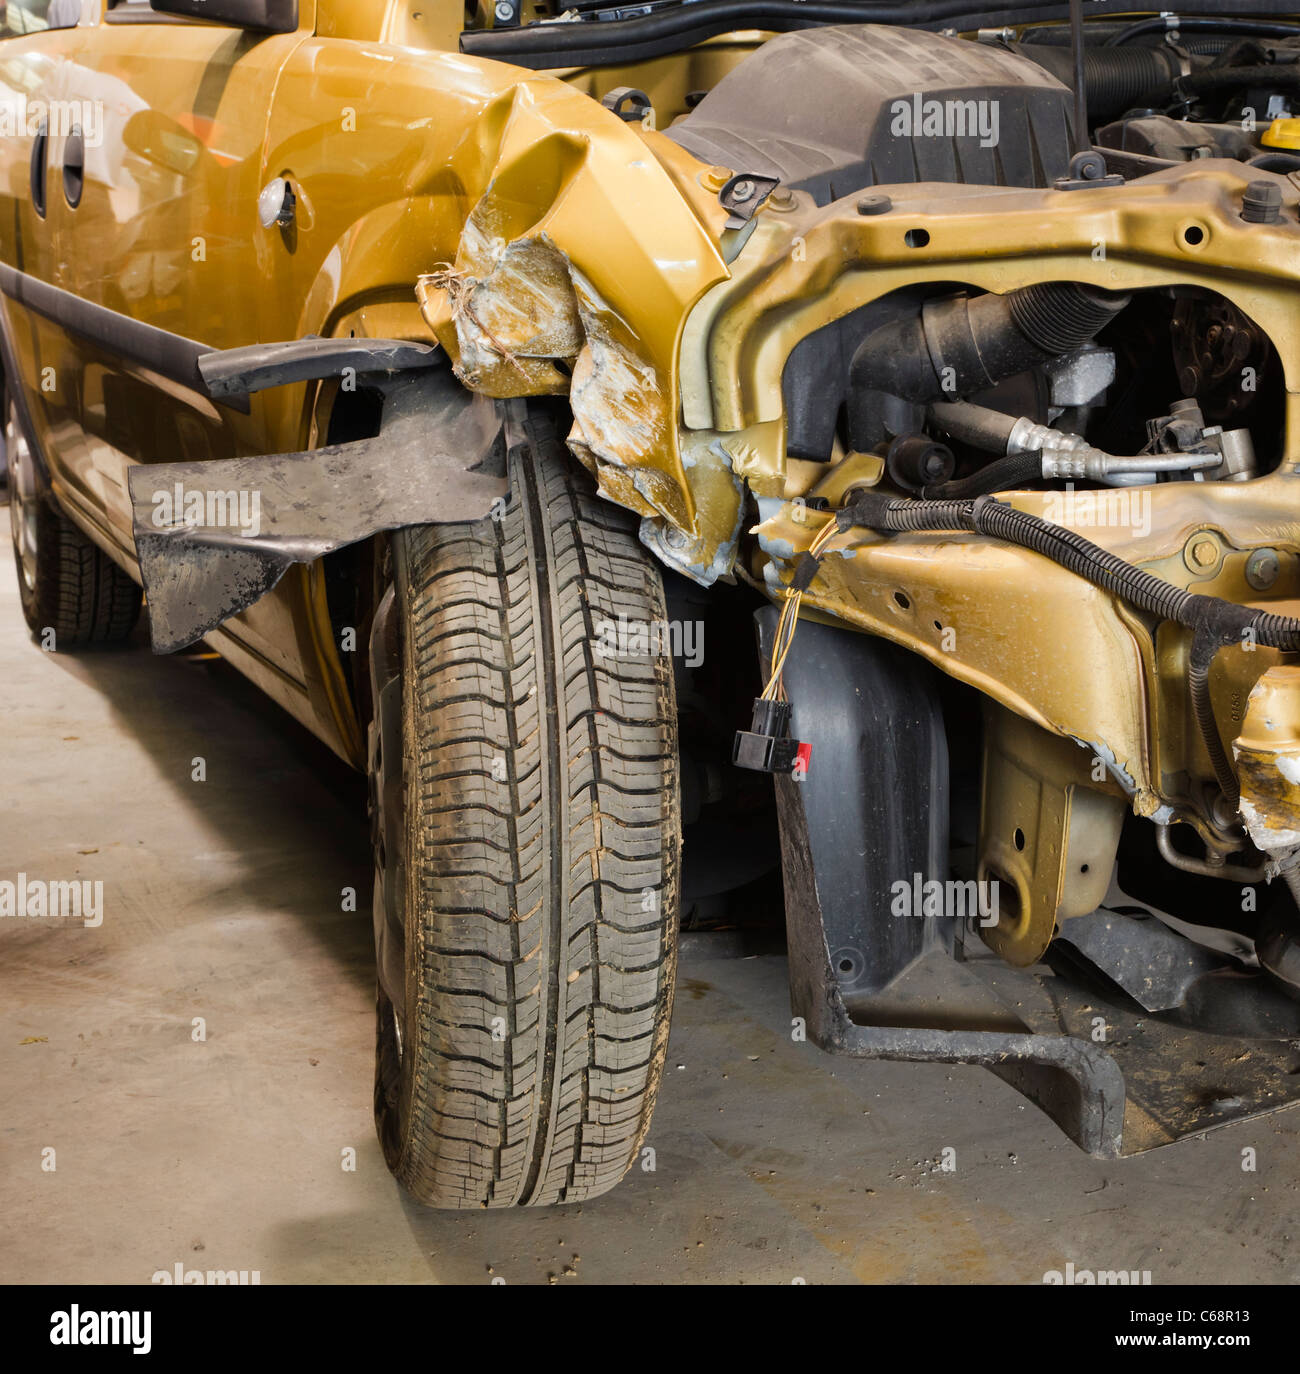 Vehicle which has been in accident and severely damaged. Stock Photo